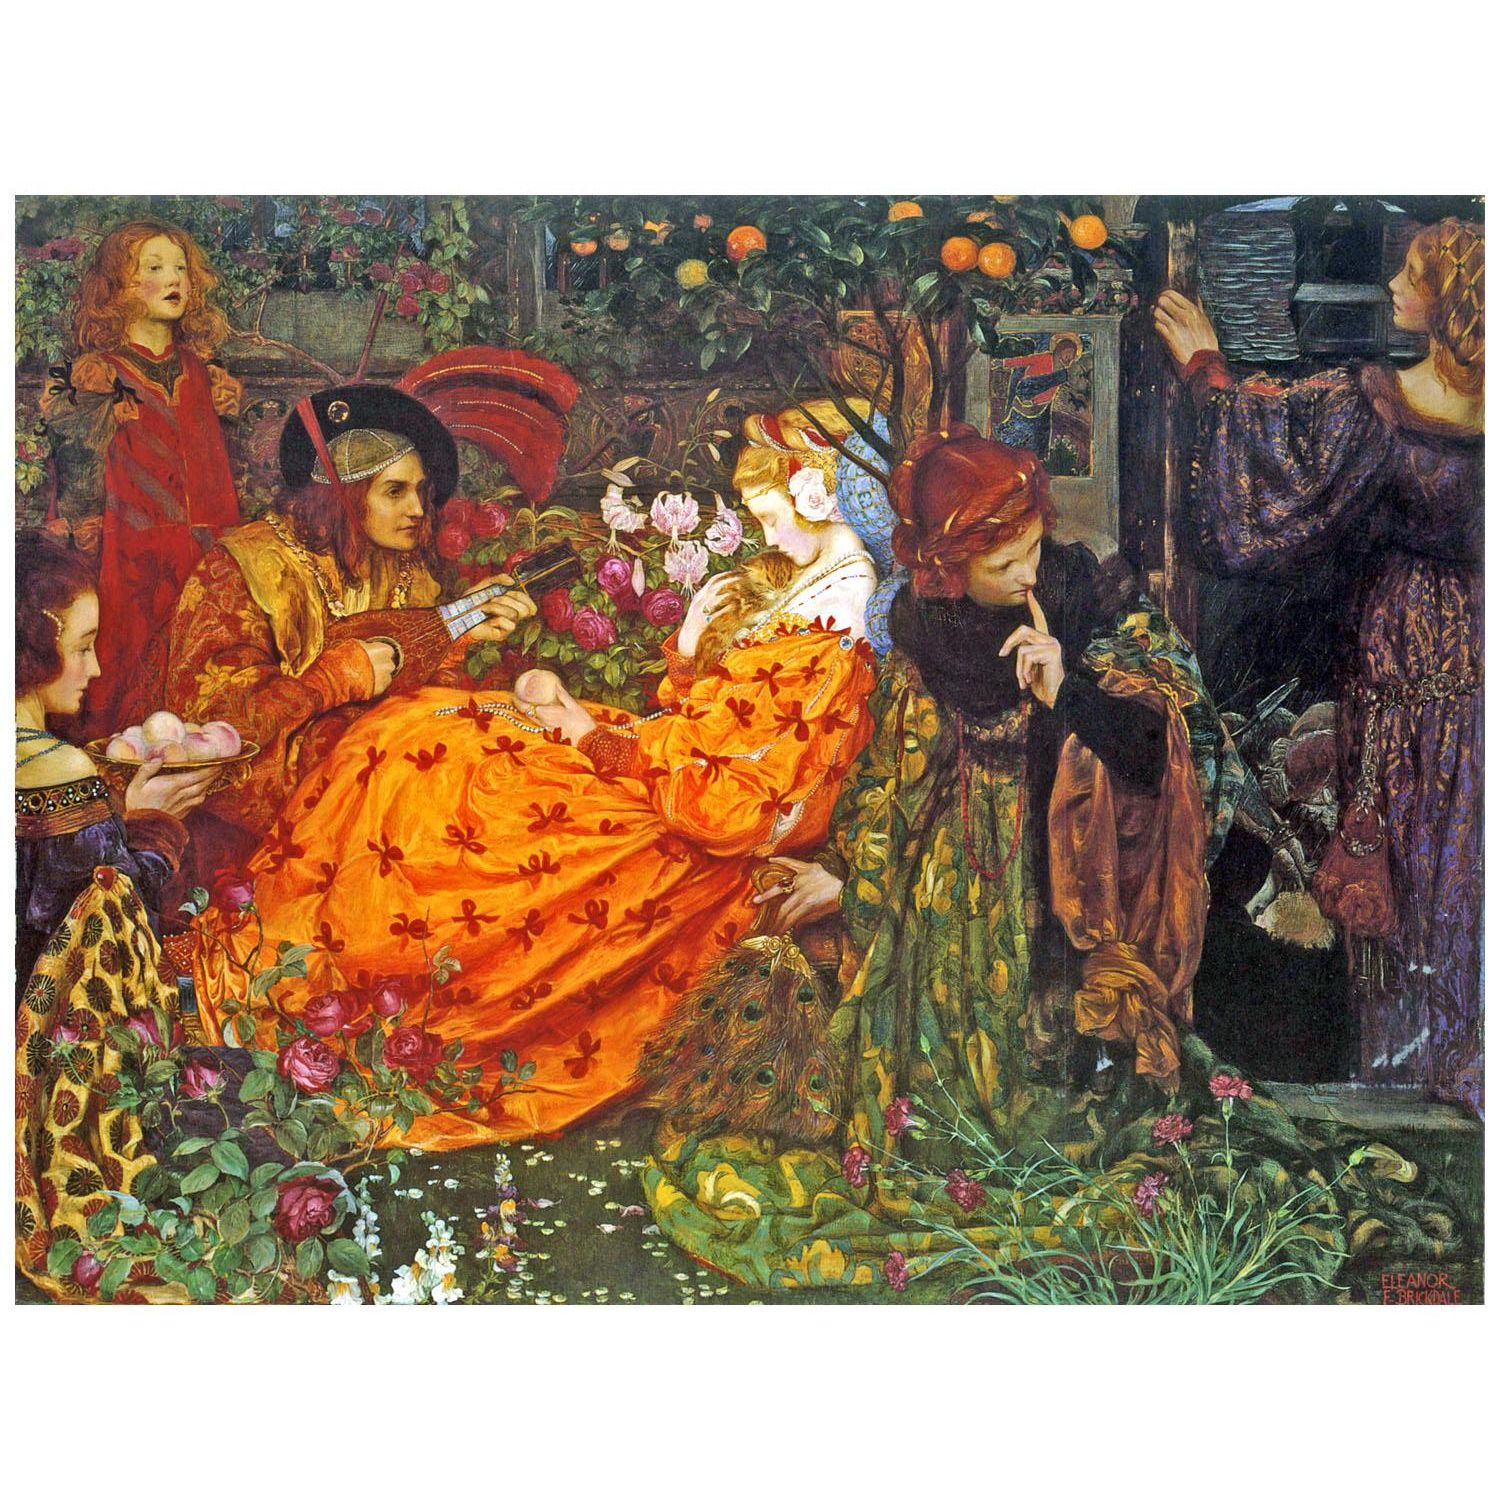 Eleanor Fortescue-Brickdale. The Deceitfulness of Riches. 1901